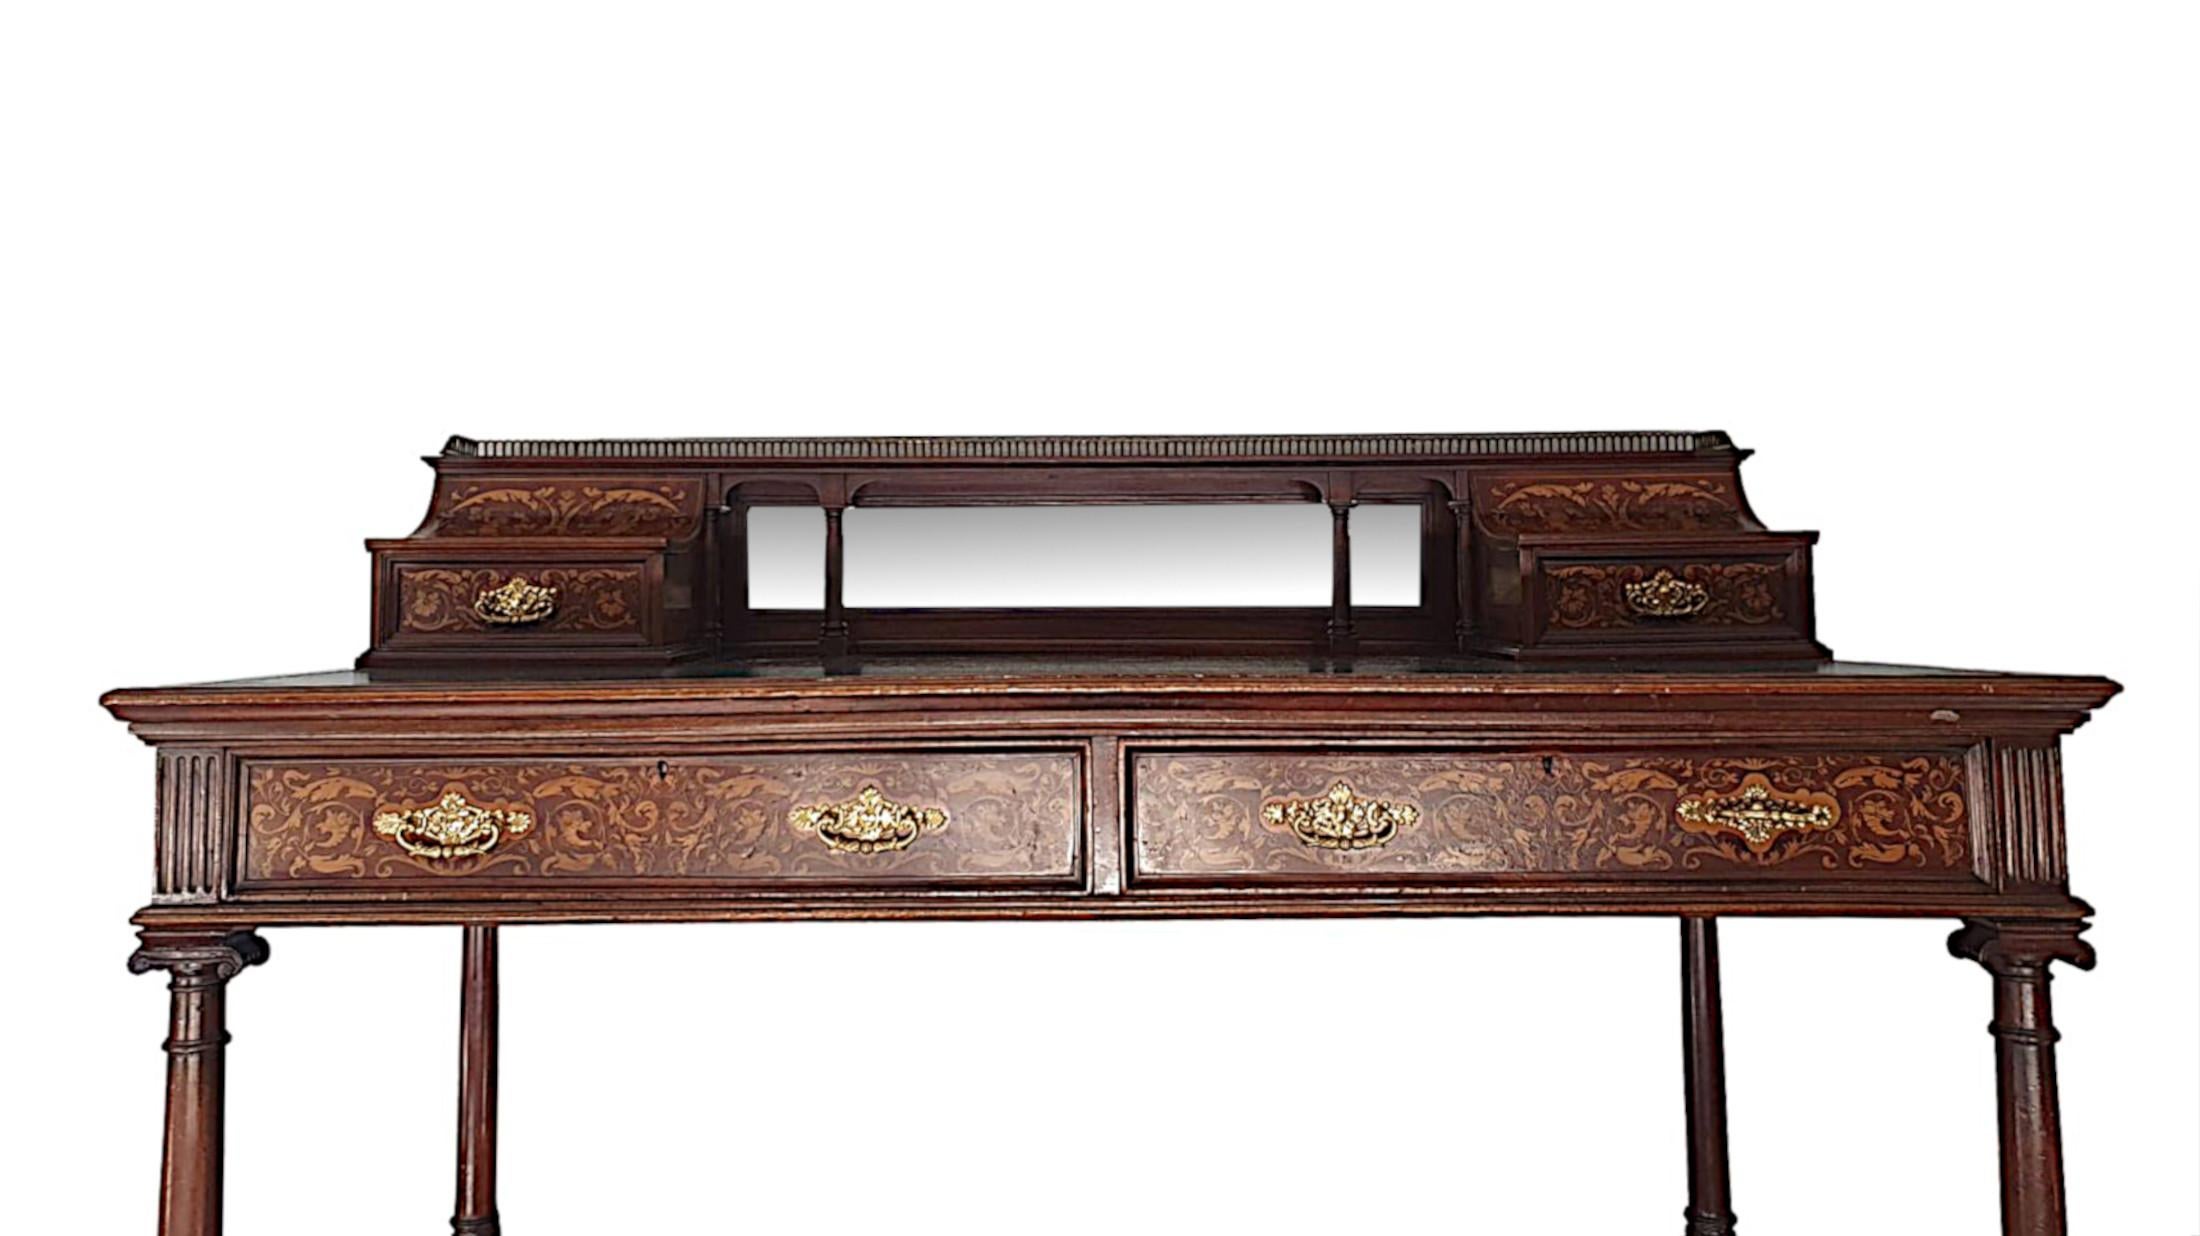 English A Fabulous Edwardian Desk attributed to Edward and Roberts For Sale